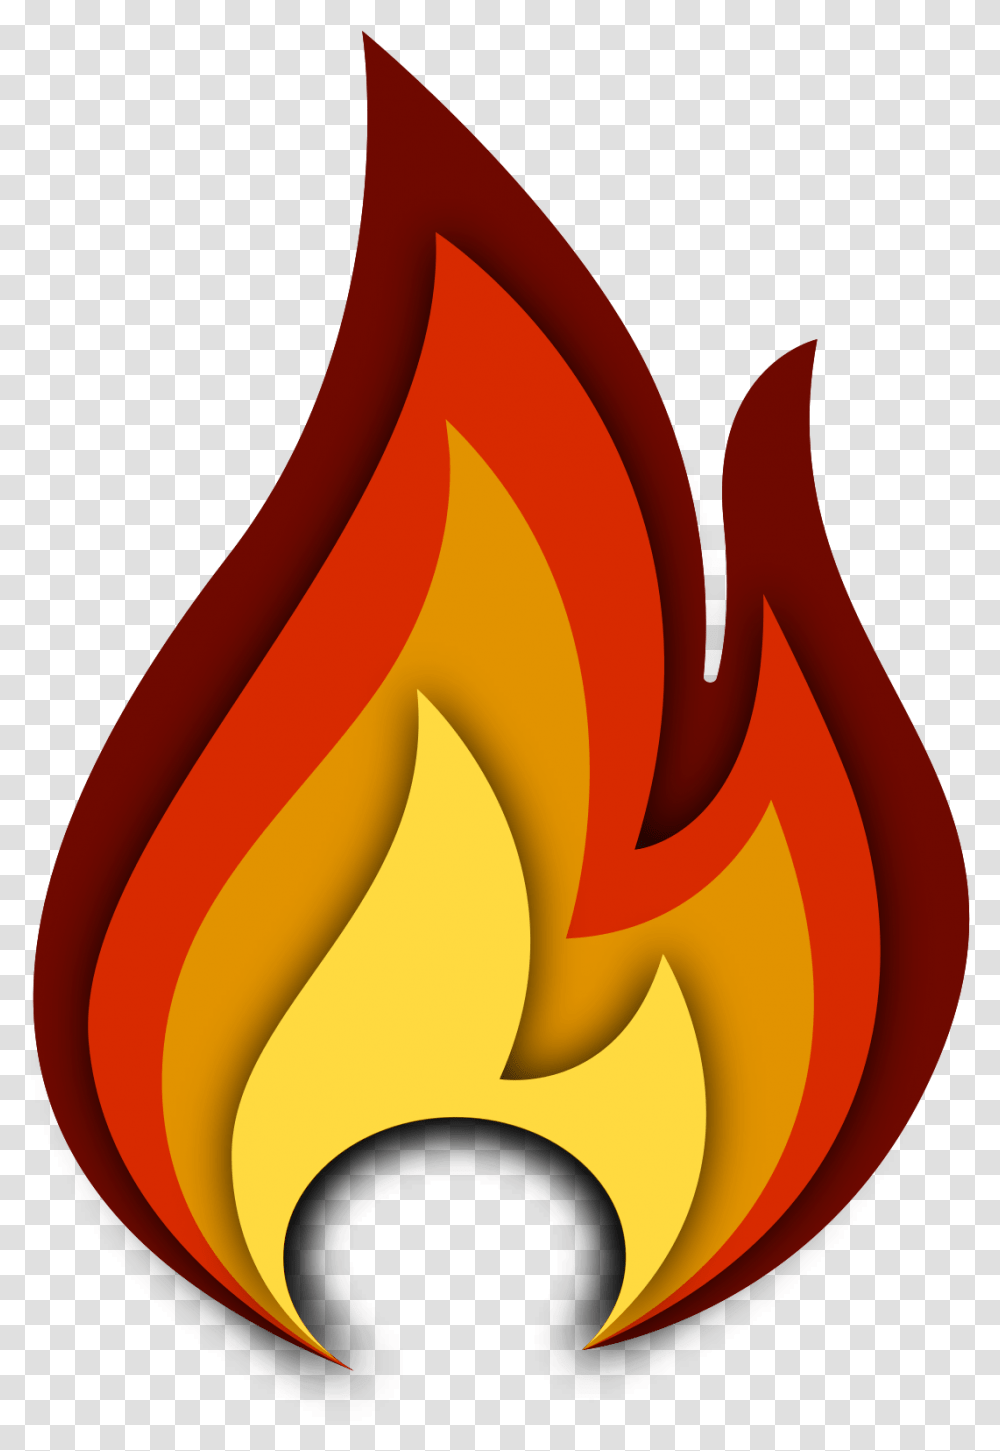 Free Fire With Background Fre Fire Fuego, Flame, Banana, Fruit, Plant Transparent Png